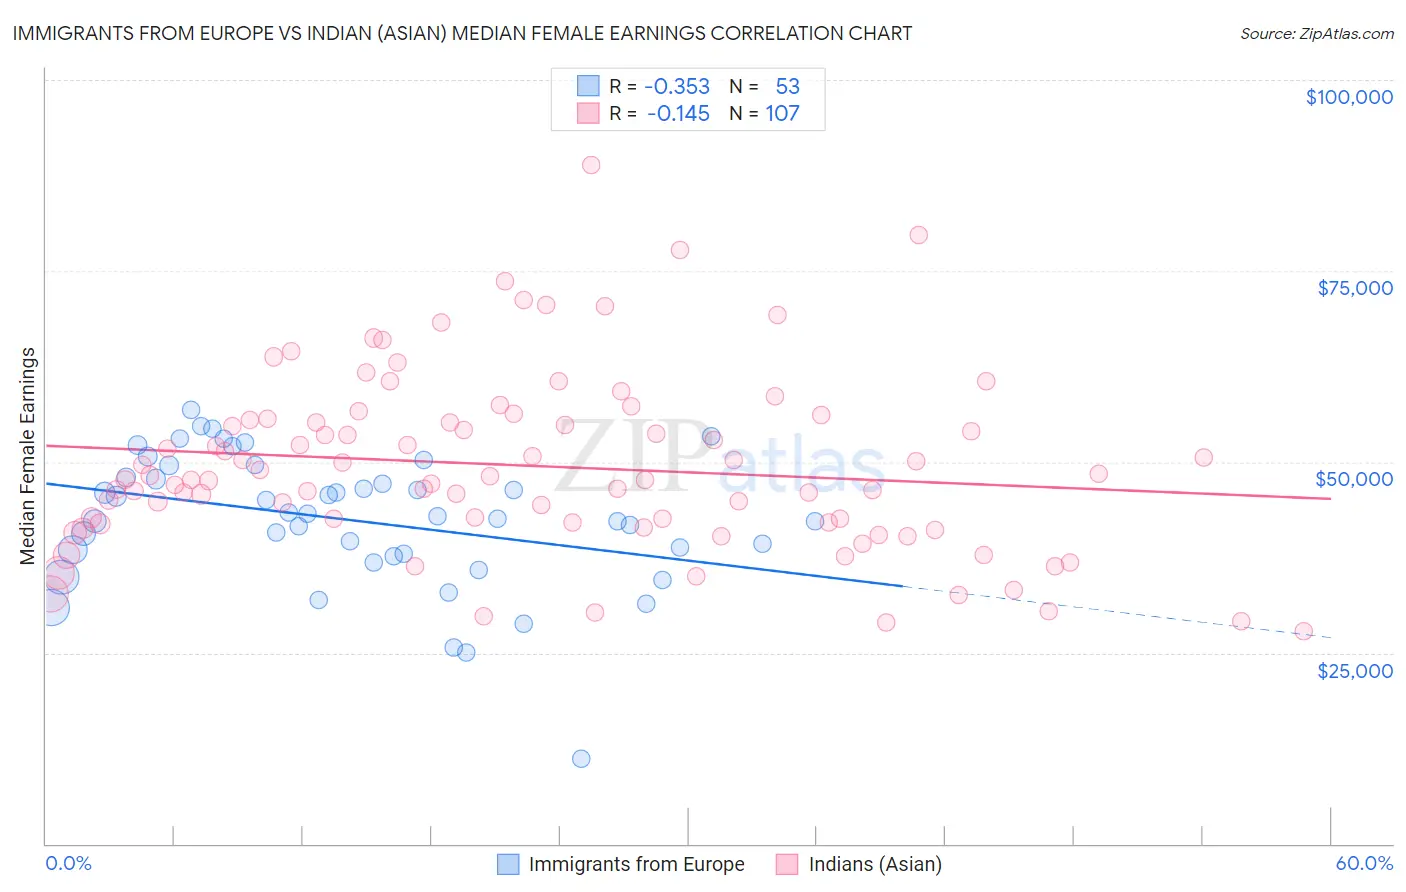 Immigrants from Europe vs Indian (Asian) Median Female Earnings